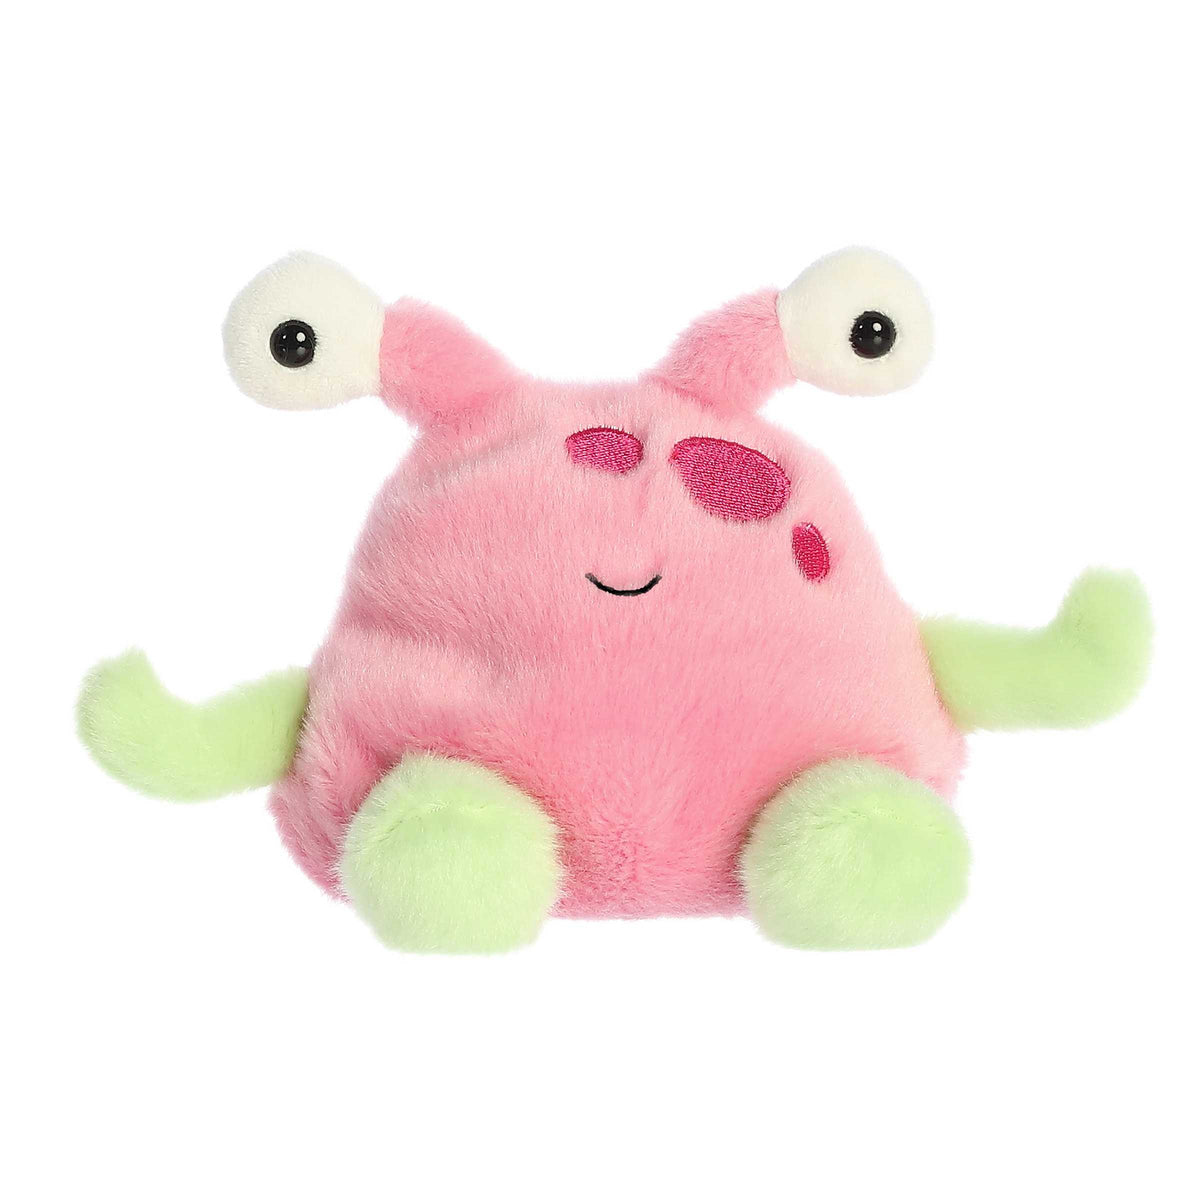 Cuddly tiny alien plush with pink body filled with bean pellets, green arms and legs, and popped-out eyes over its head